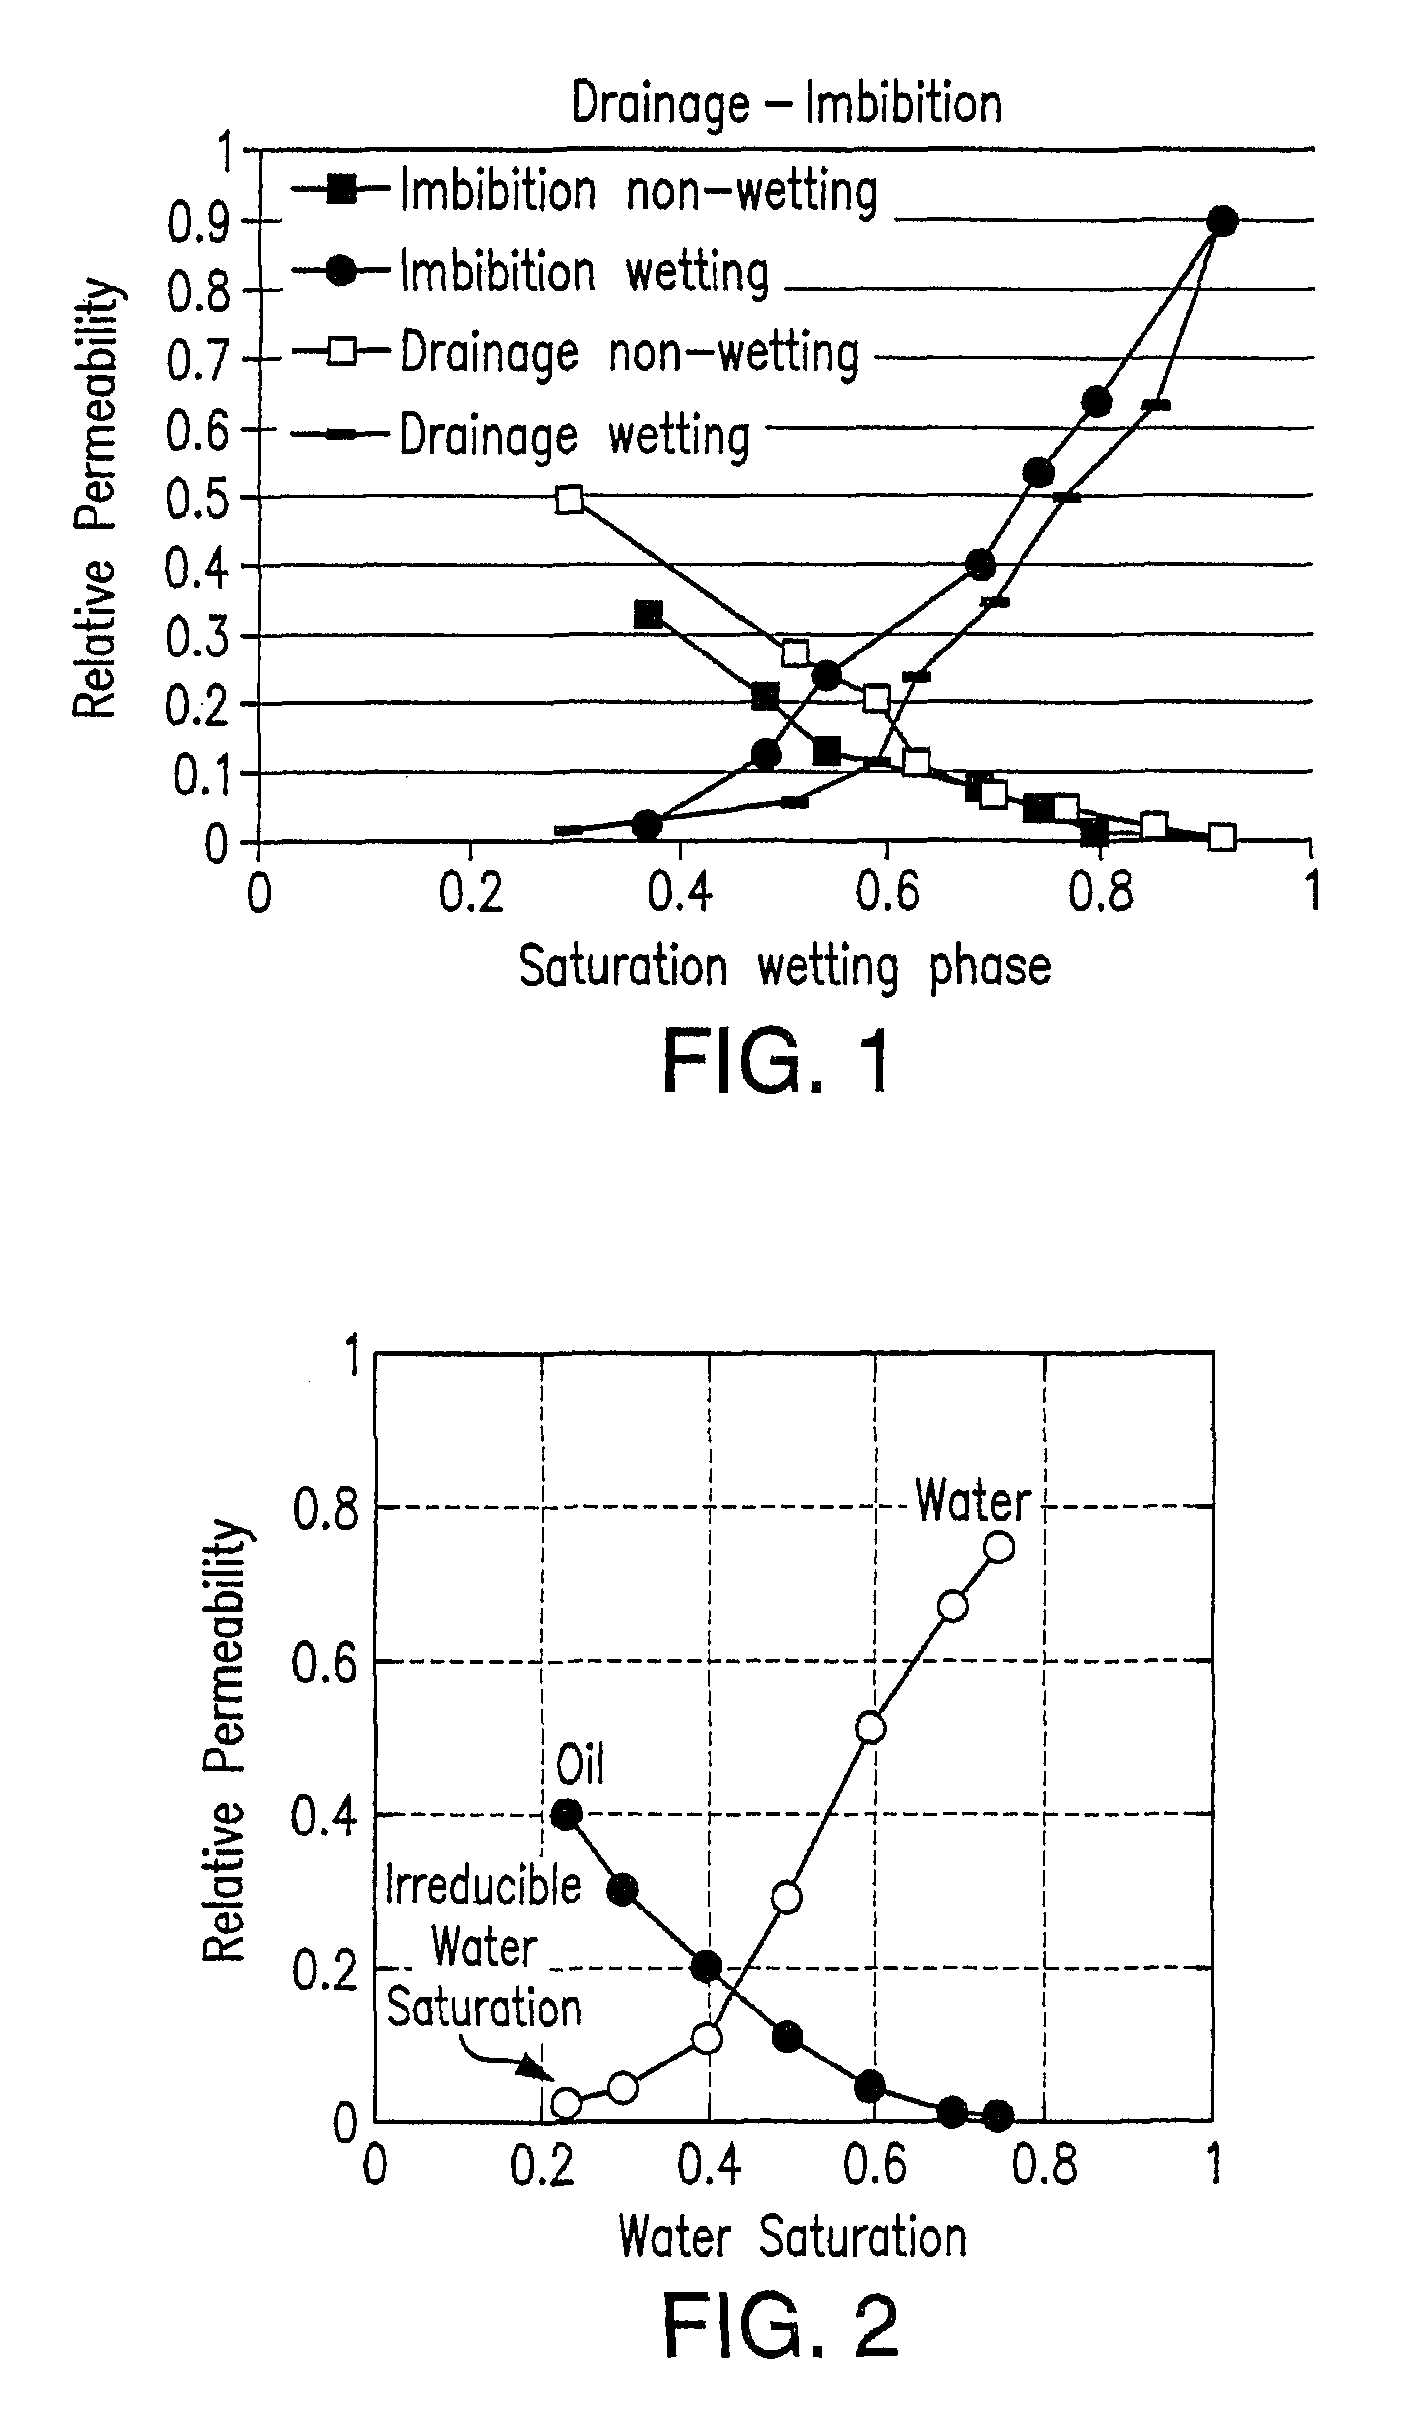 Method for evaluating relative permeability for fractional multi-phase, multi-component fluid flow through porous media